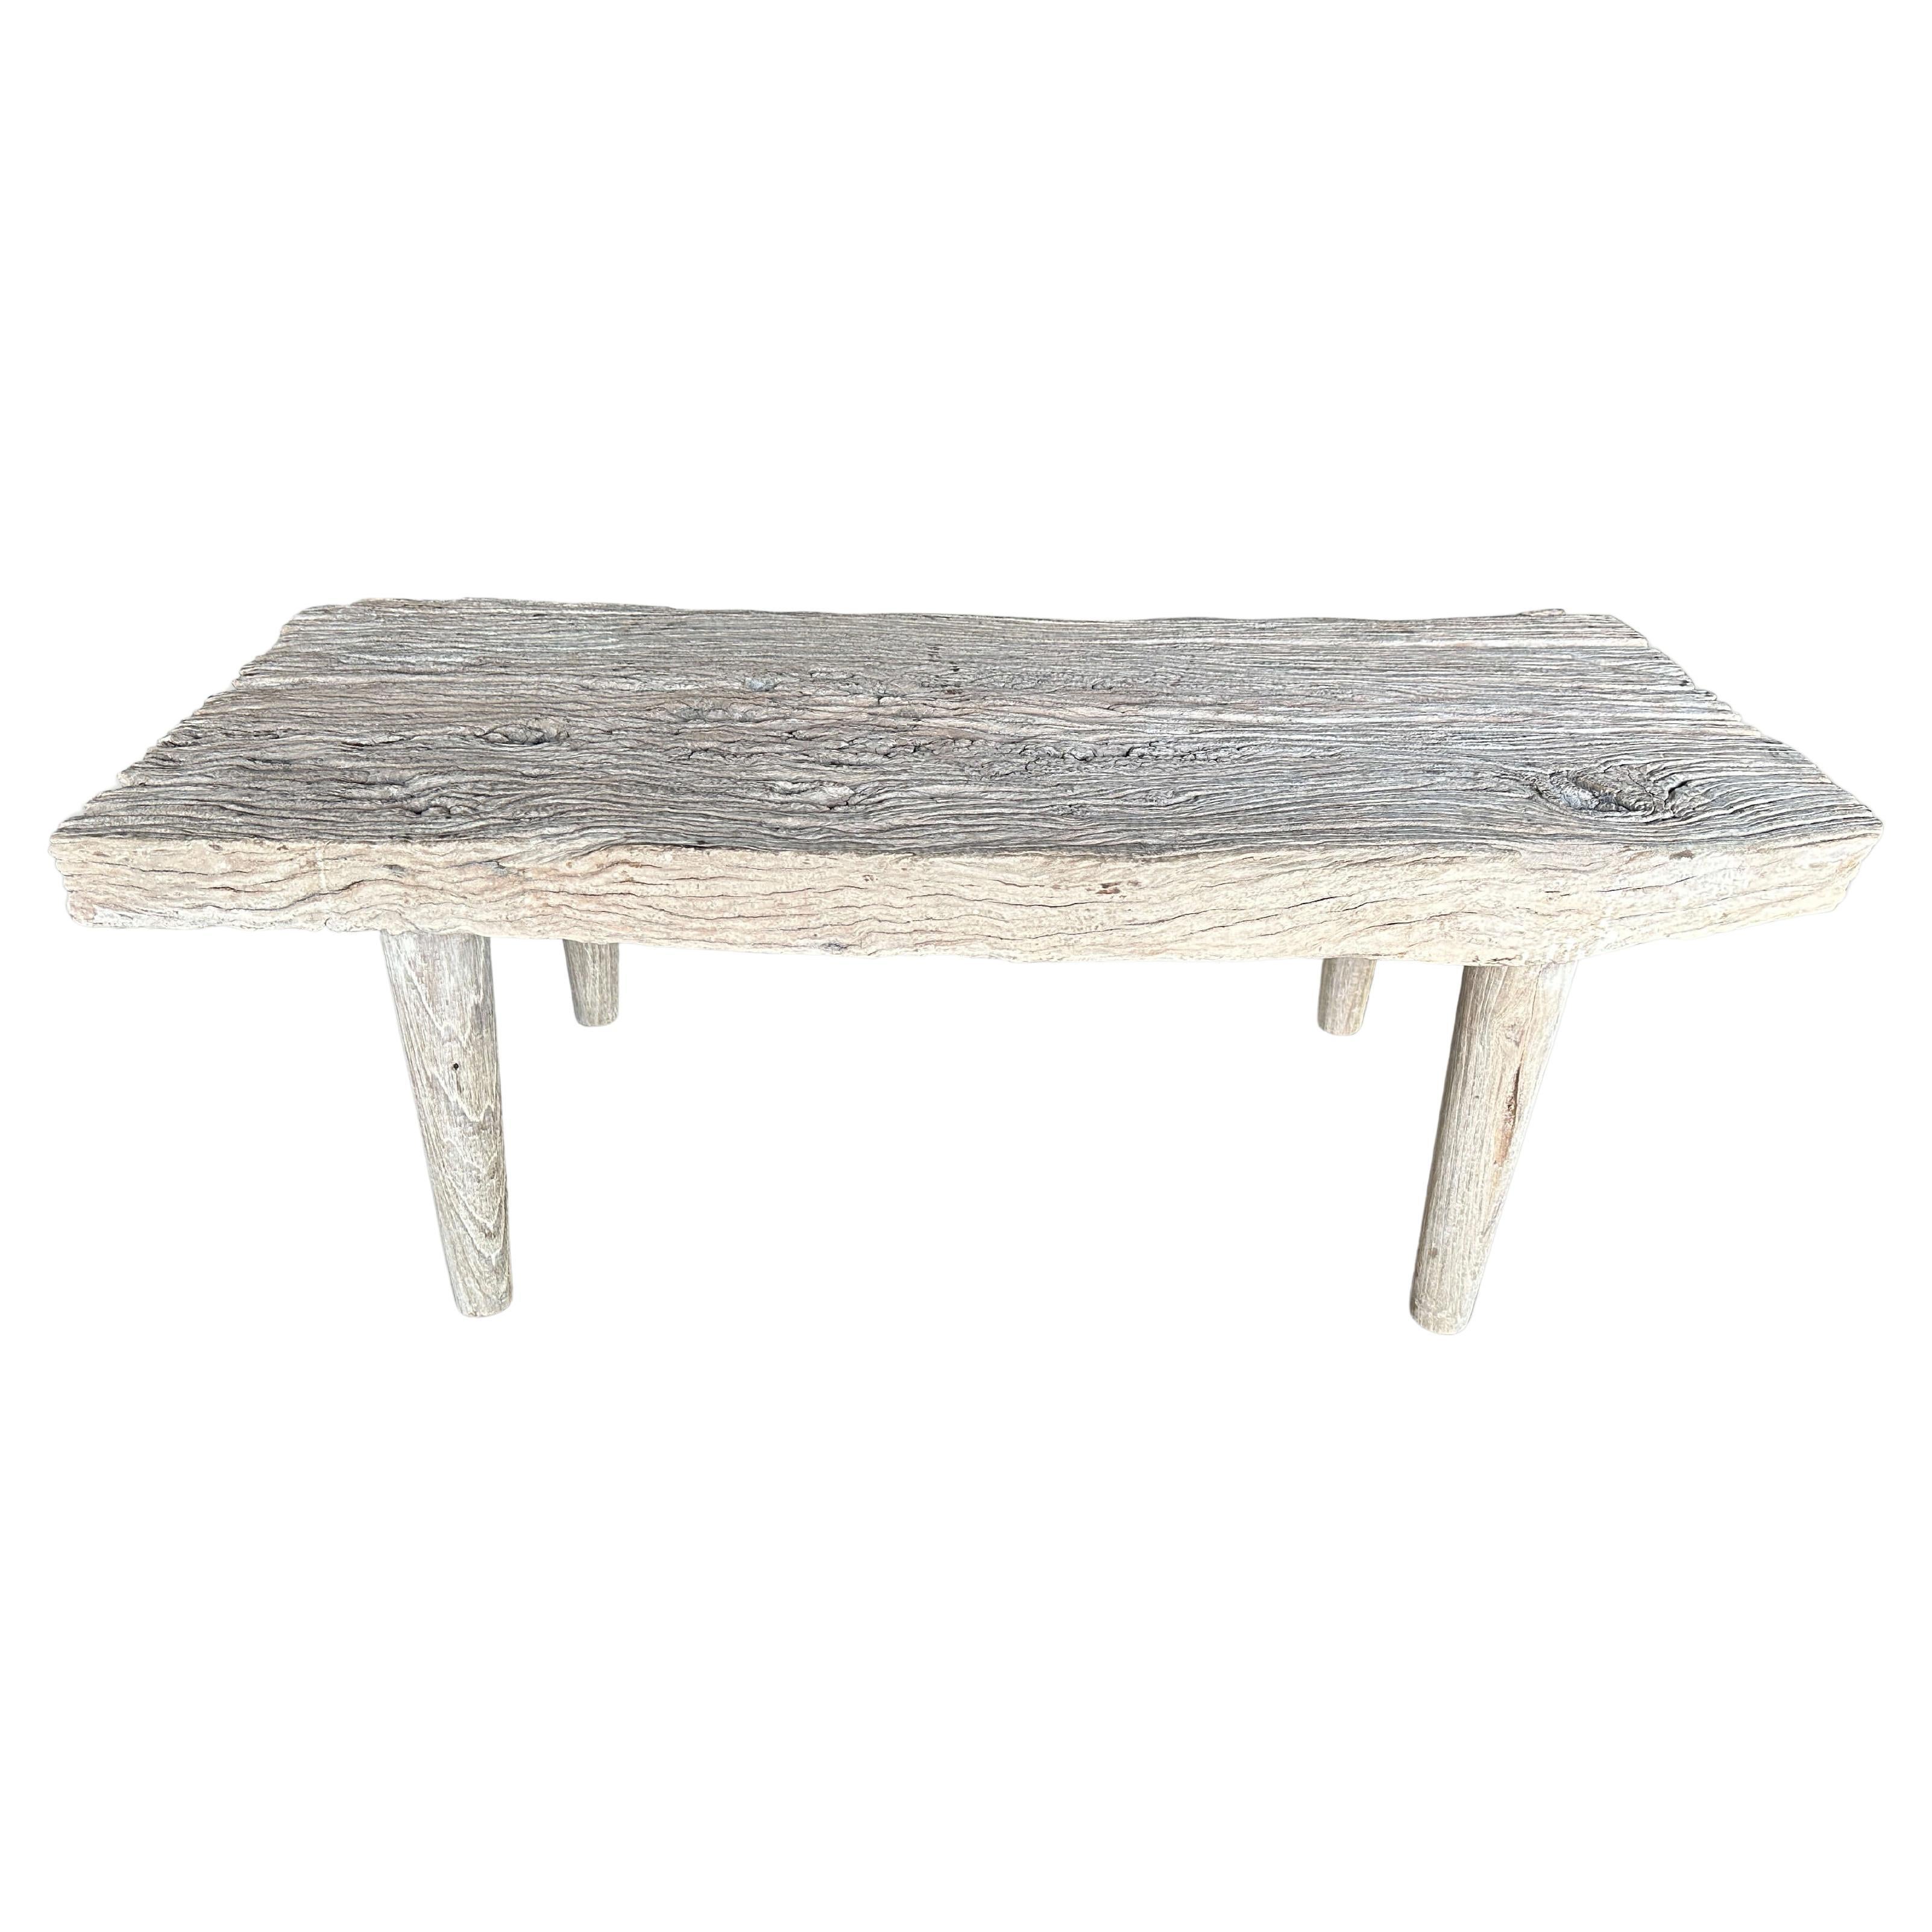 Andrianna Shamaris St. Barts Teak Wood Coffee Table or Bench For Sale